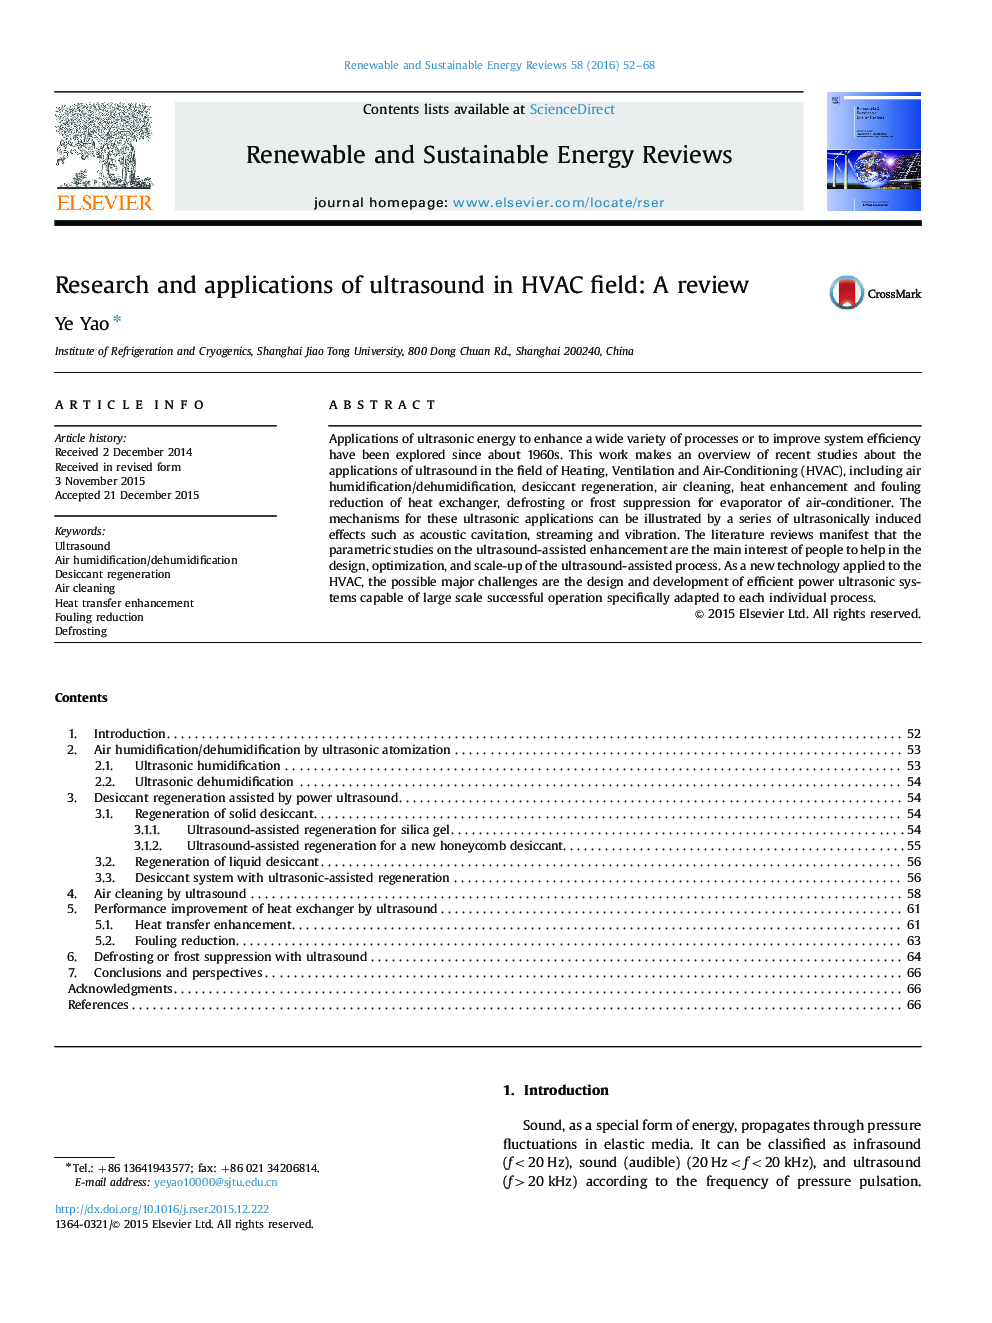 Research and applications of ultrasound in HVAC field: A review